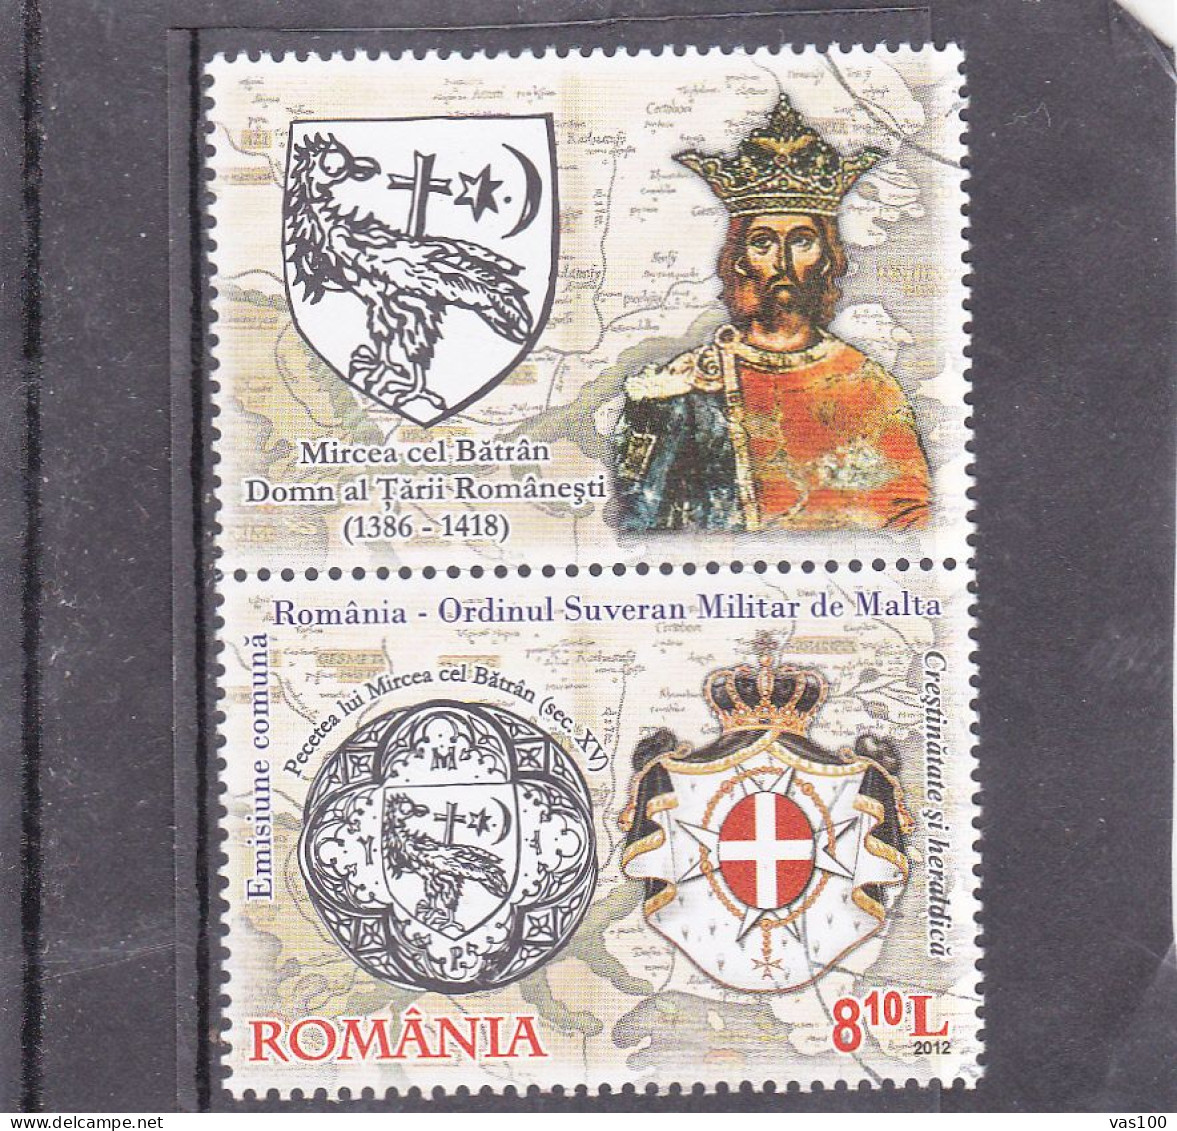 ROMANIA 2012 Relations With Sovereign Maltese Order USED + LABELS. Michel 6667 - Used Stamps